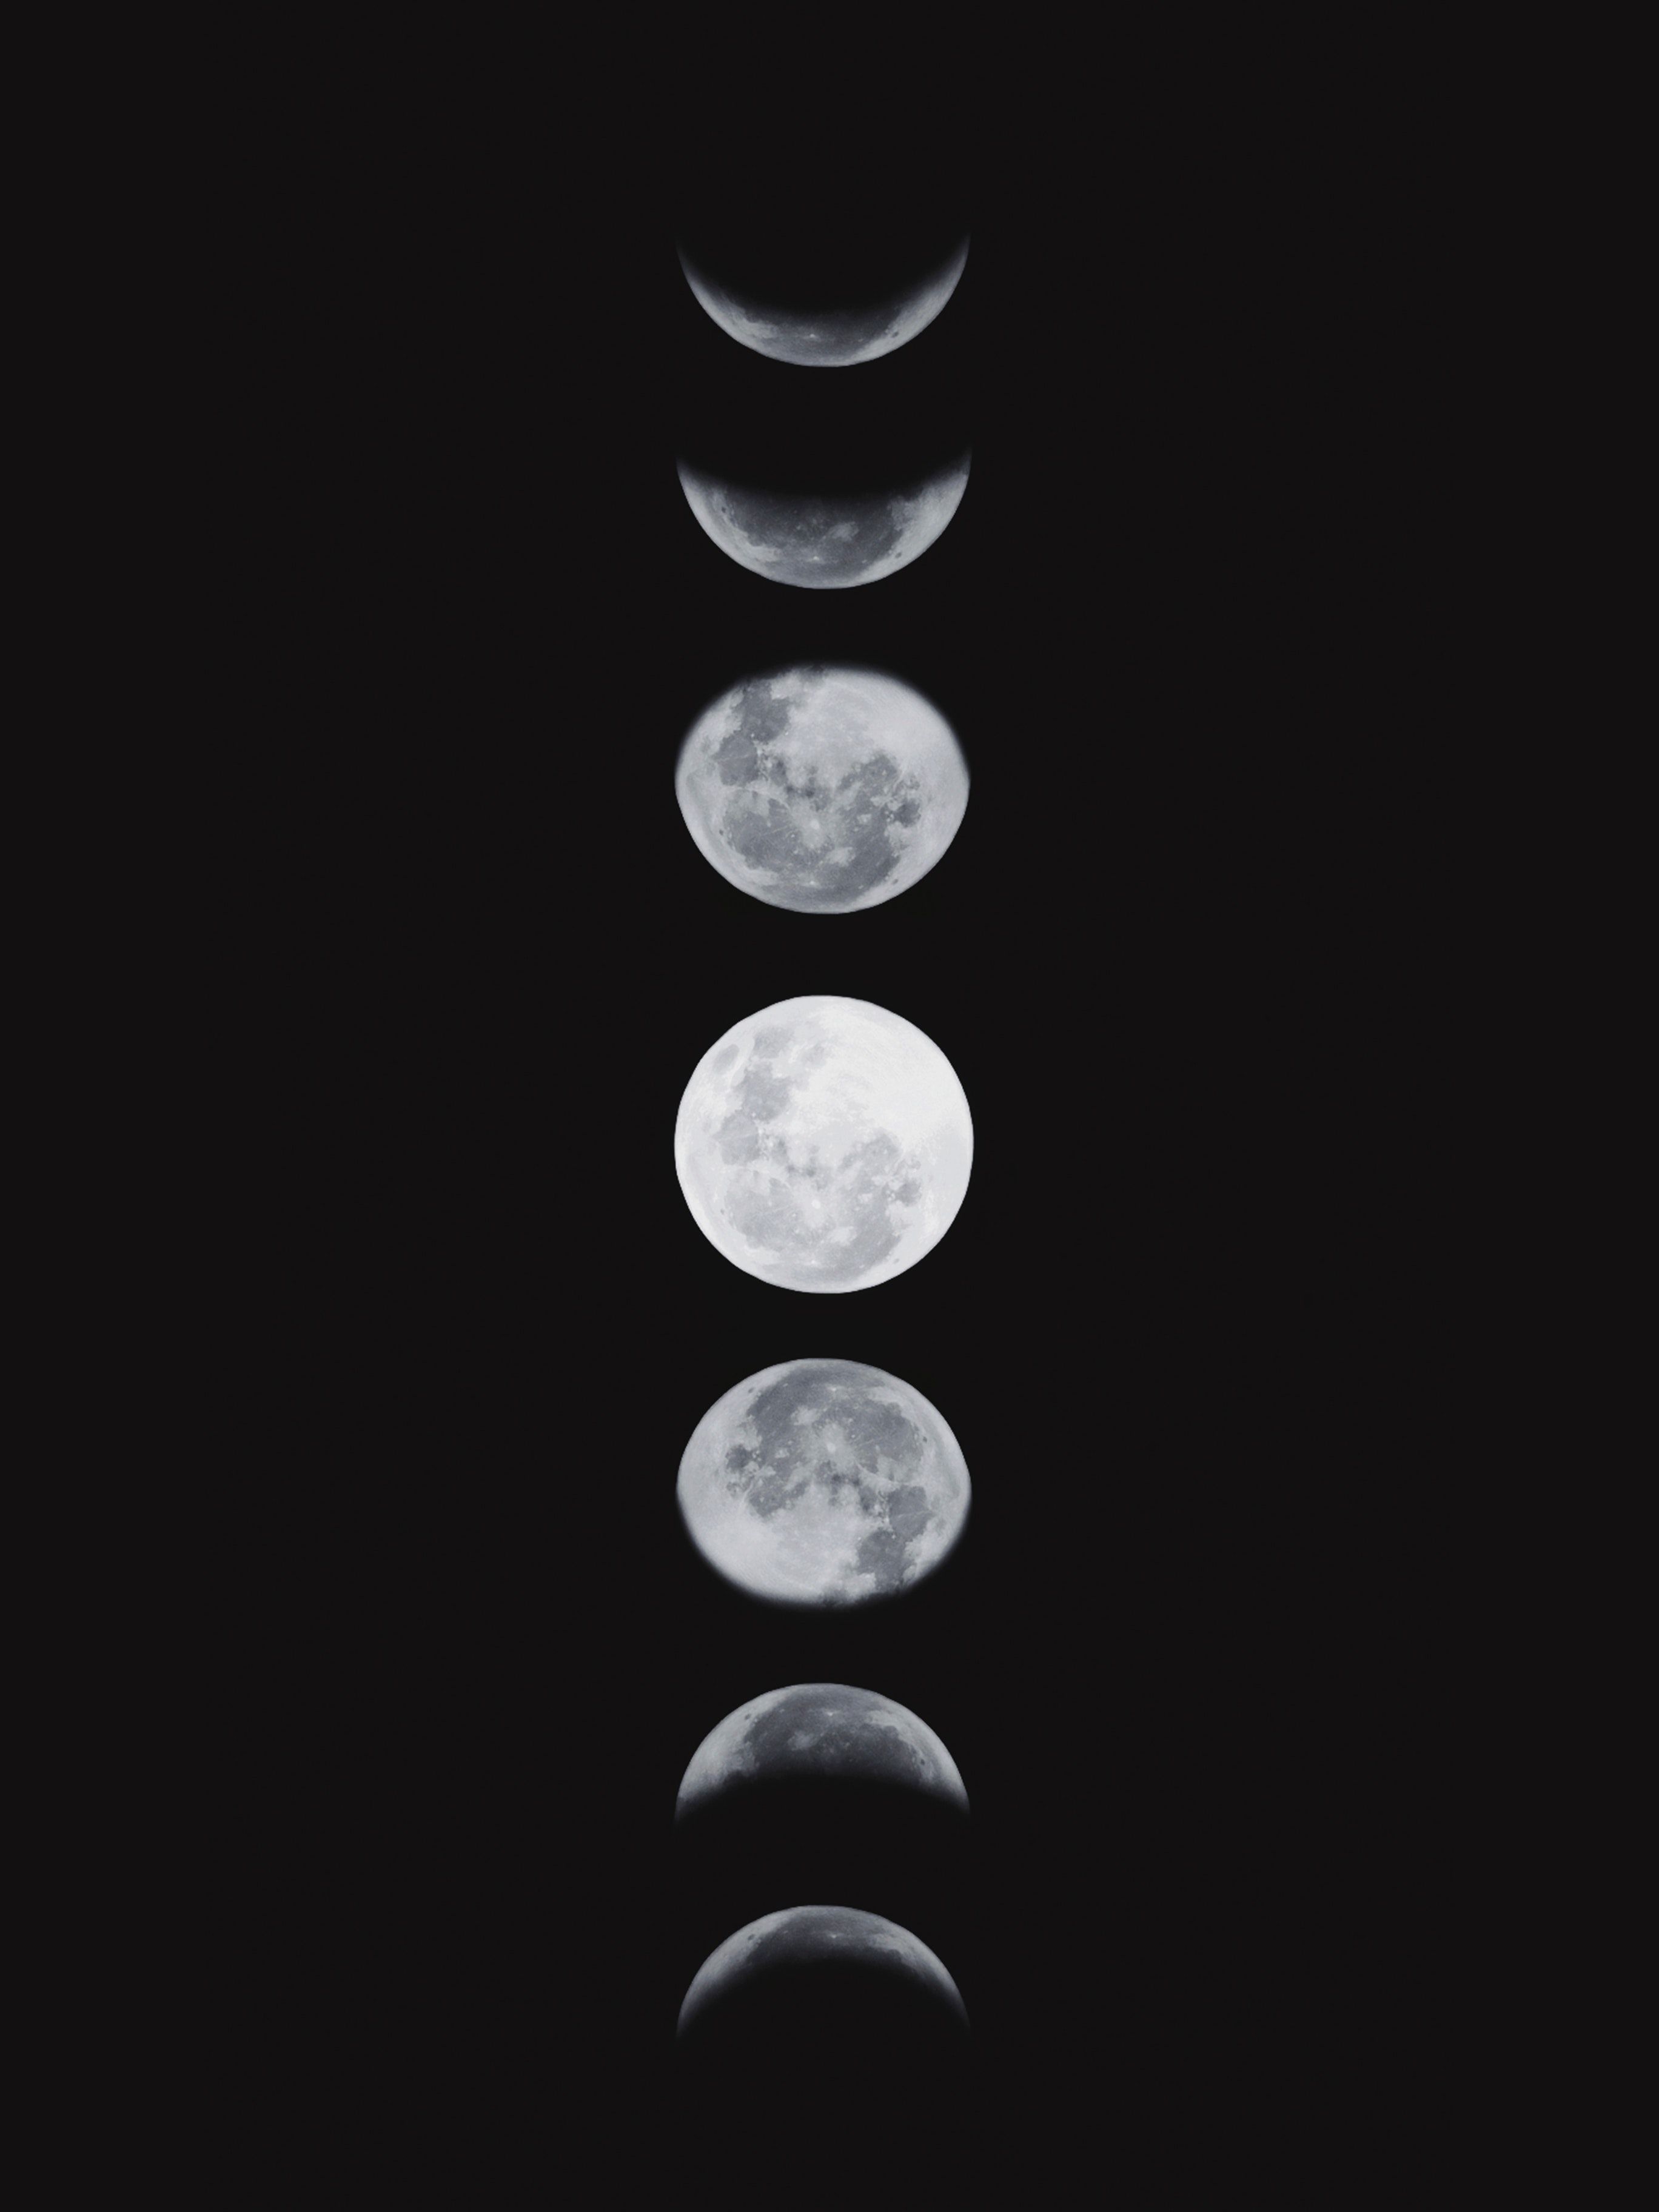 A series of six moon phases on a black background - Moon phases